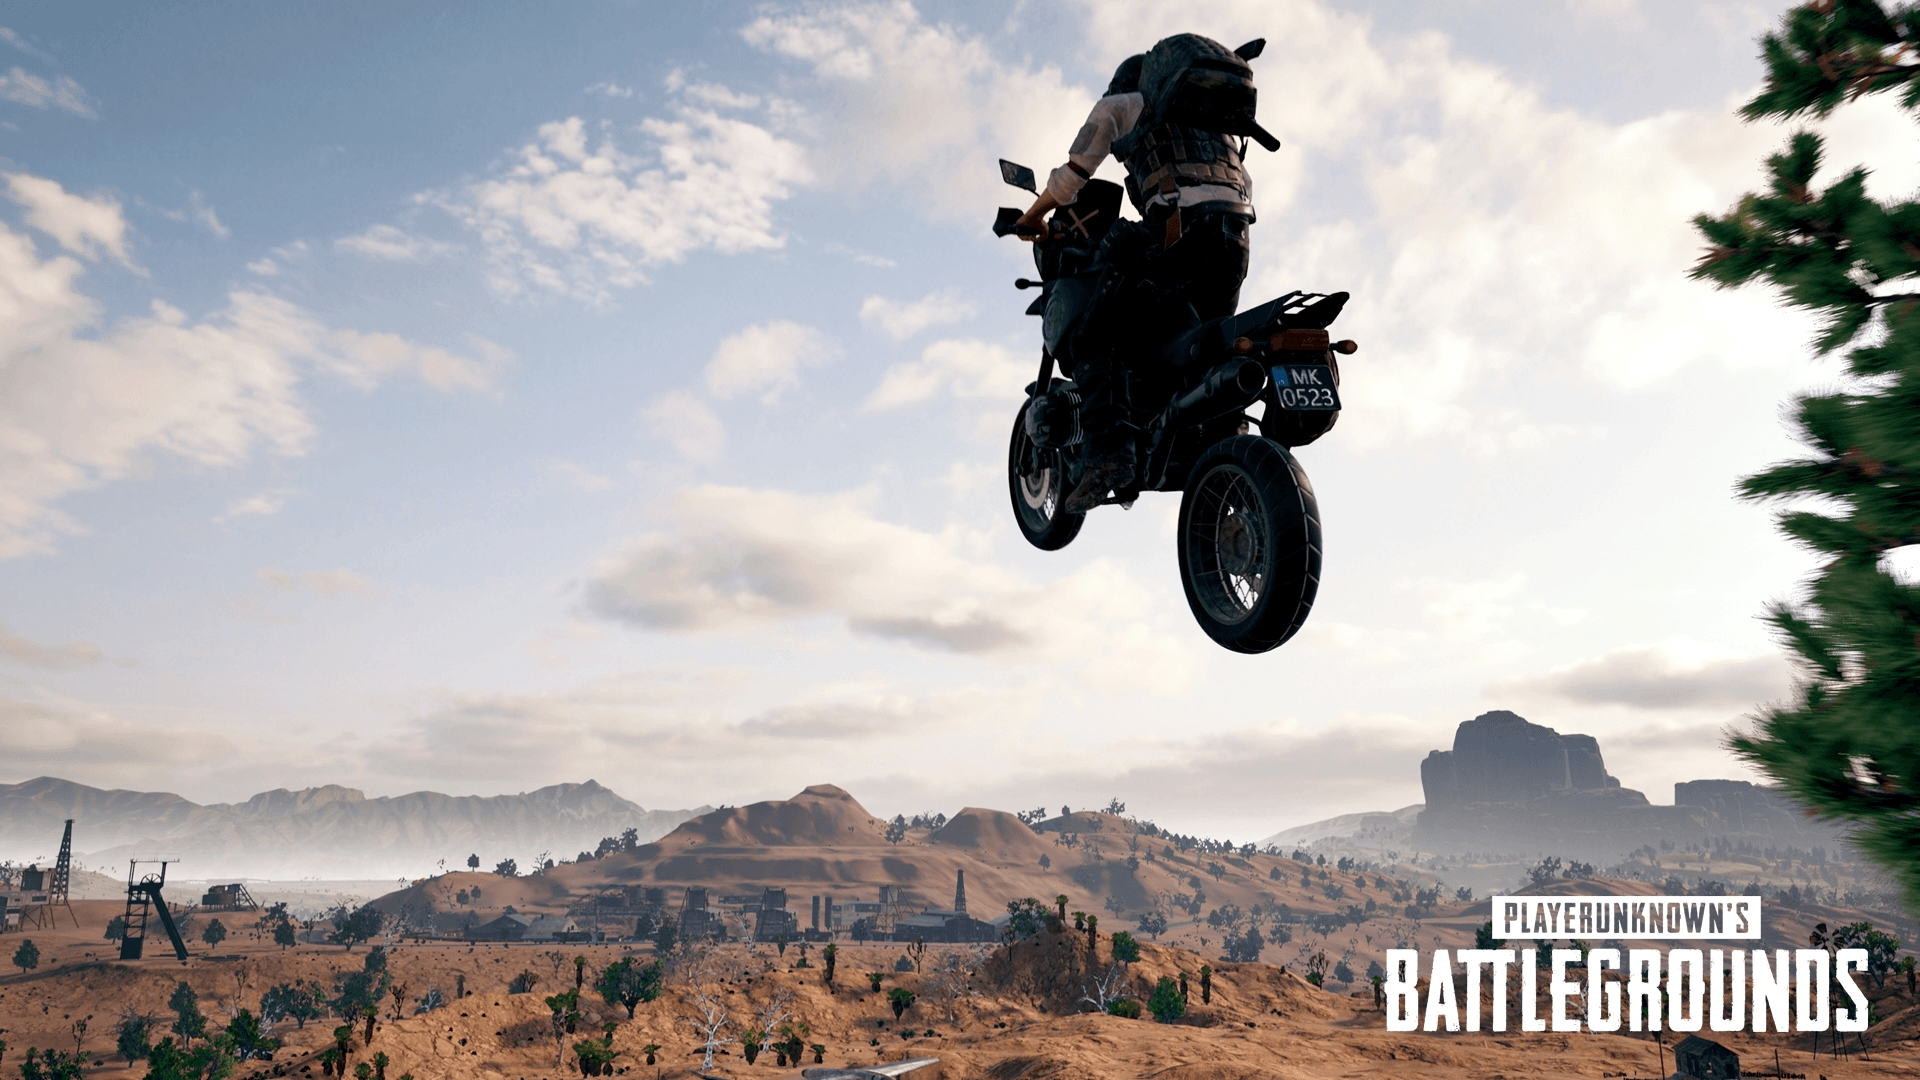 New map for PlayerUnknown's Battlegrounds coming soon